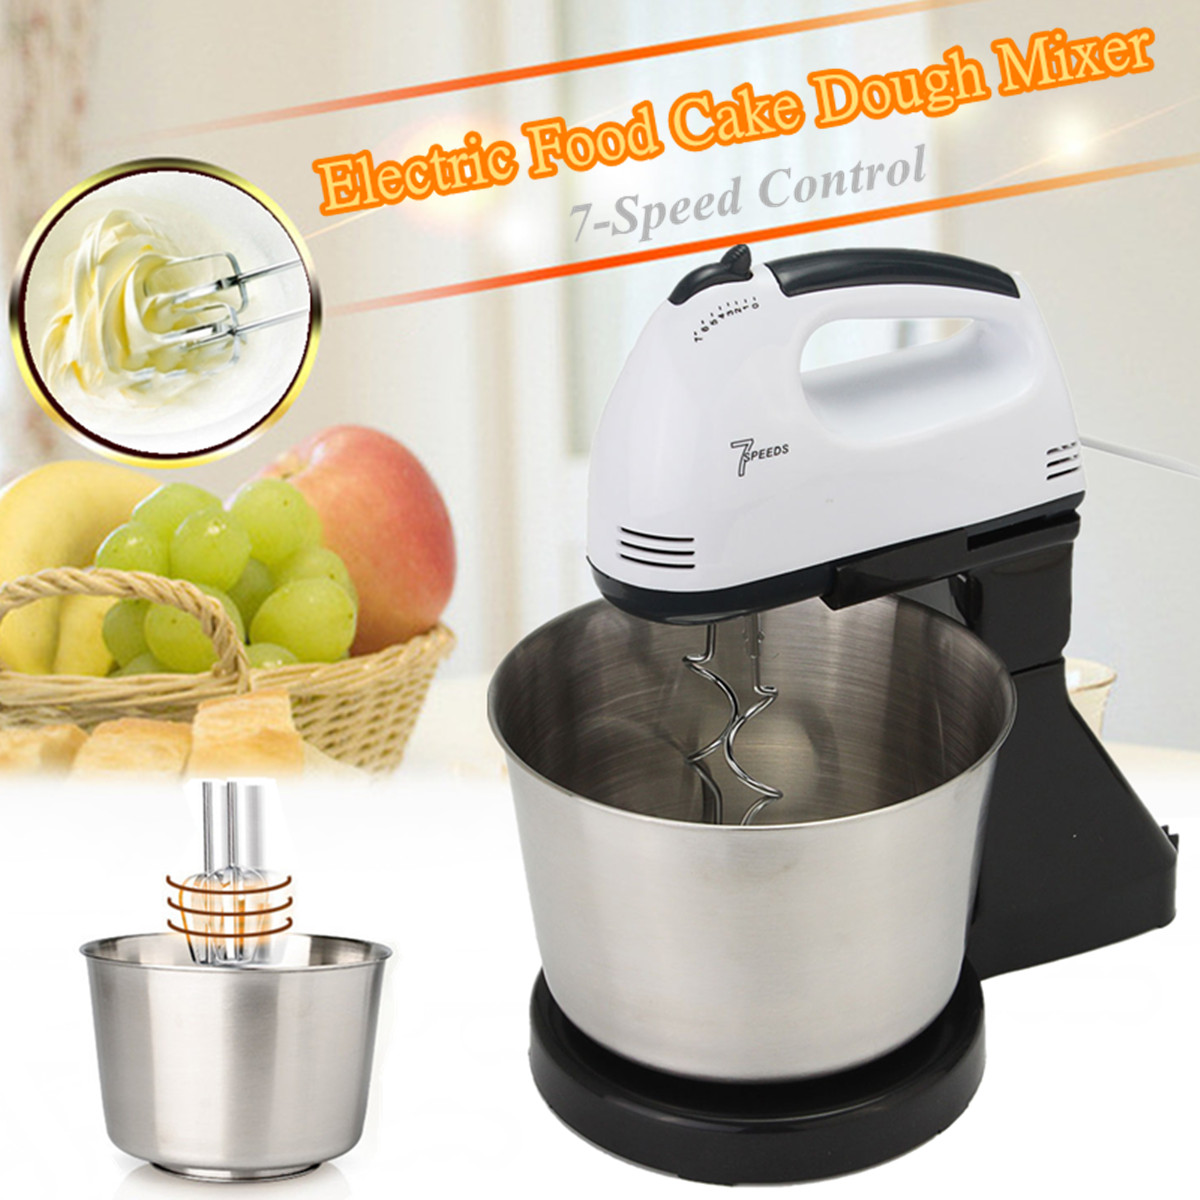 7 Speed Electric Egg Beater Dough Cakes Bread Egg Stand Mixer + Hand Blender + Bowl Food Mixer Kitchen Accessories Egg Tools 66